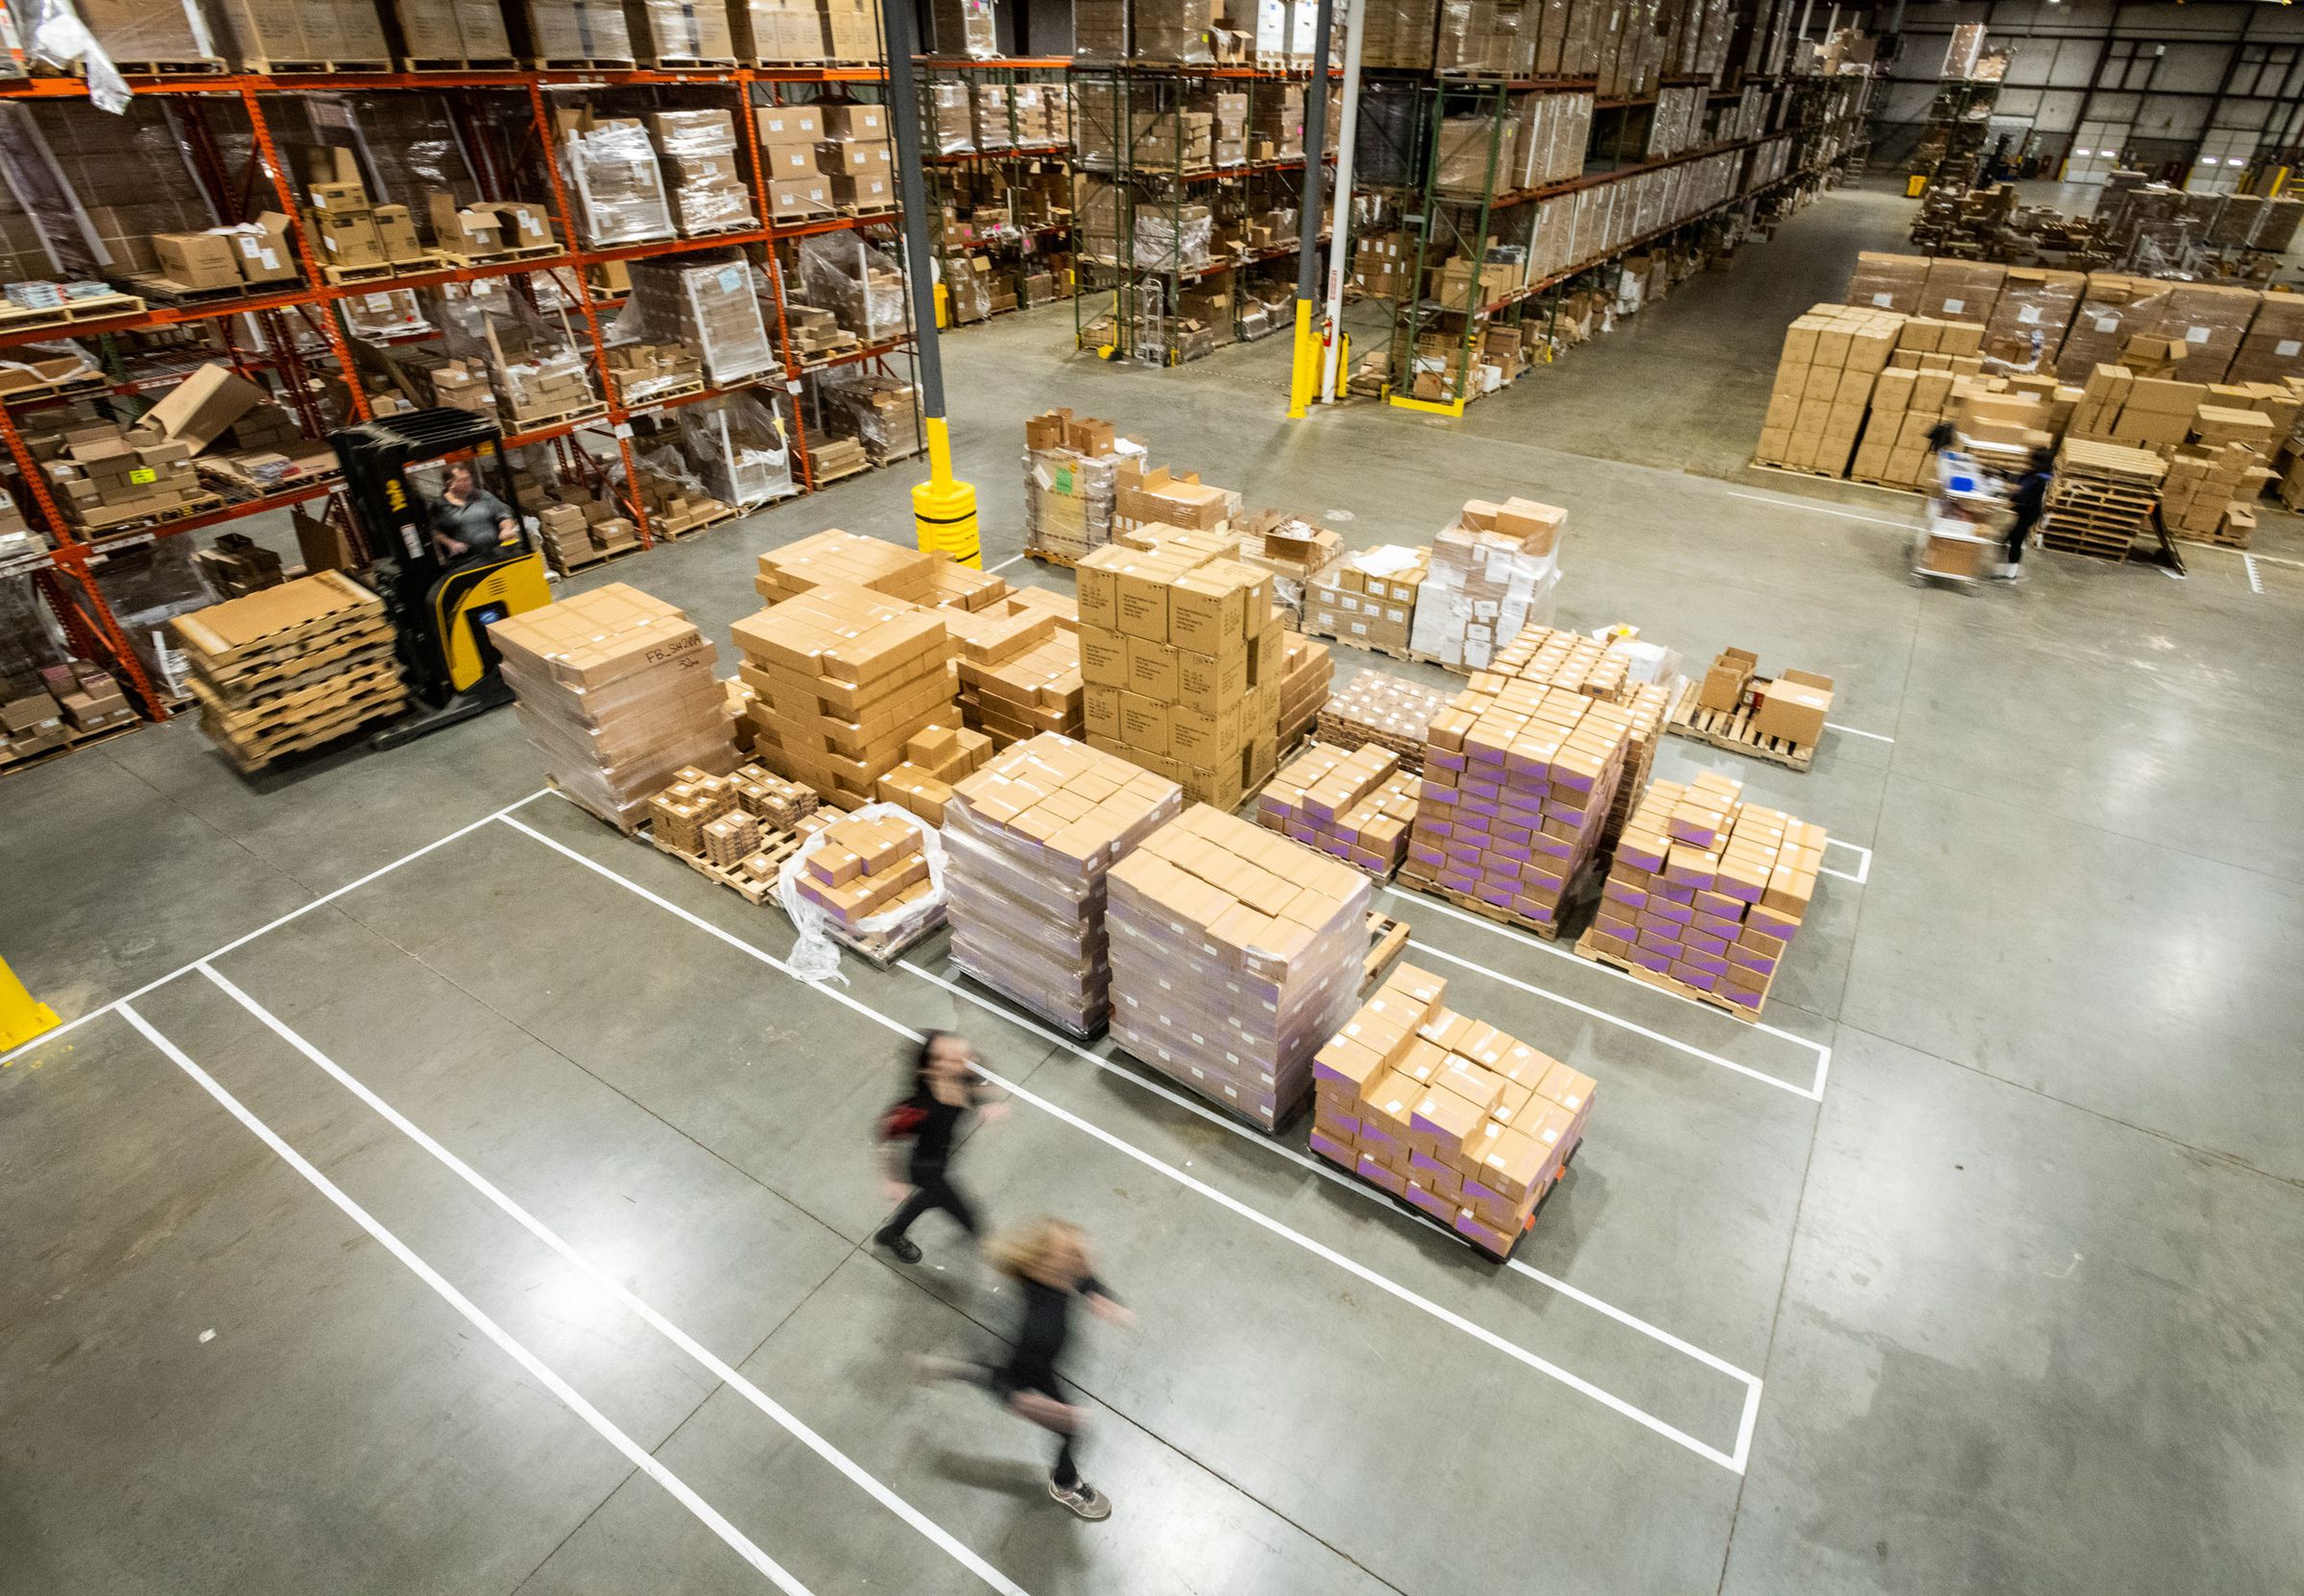 Bird’s eye view of a large warehouse floor with boxes stacked on the floor and shelves are at the edge of the frame filled with boxes.